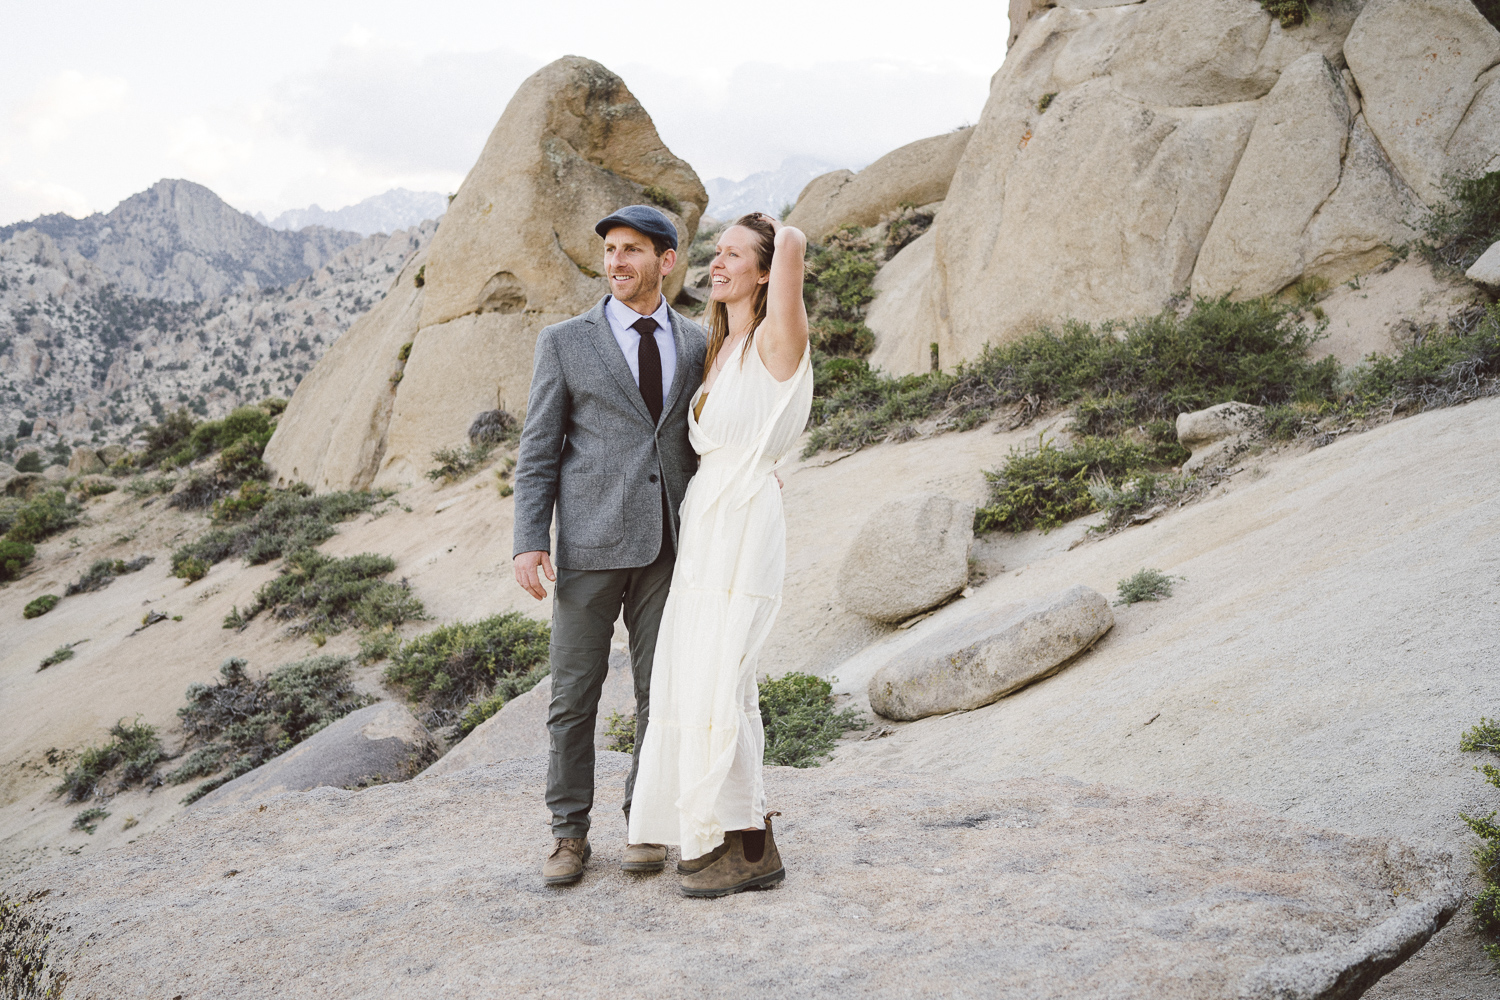 Adventurous wedding couple surrounded by granite boulders